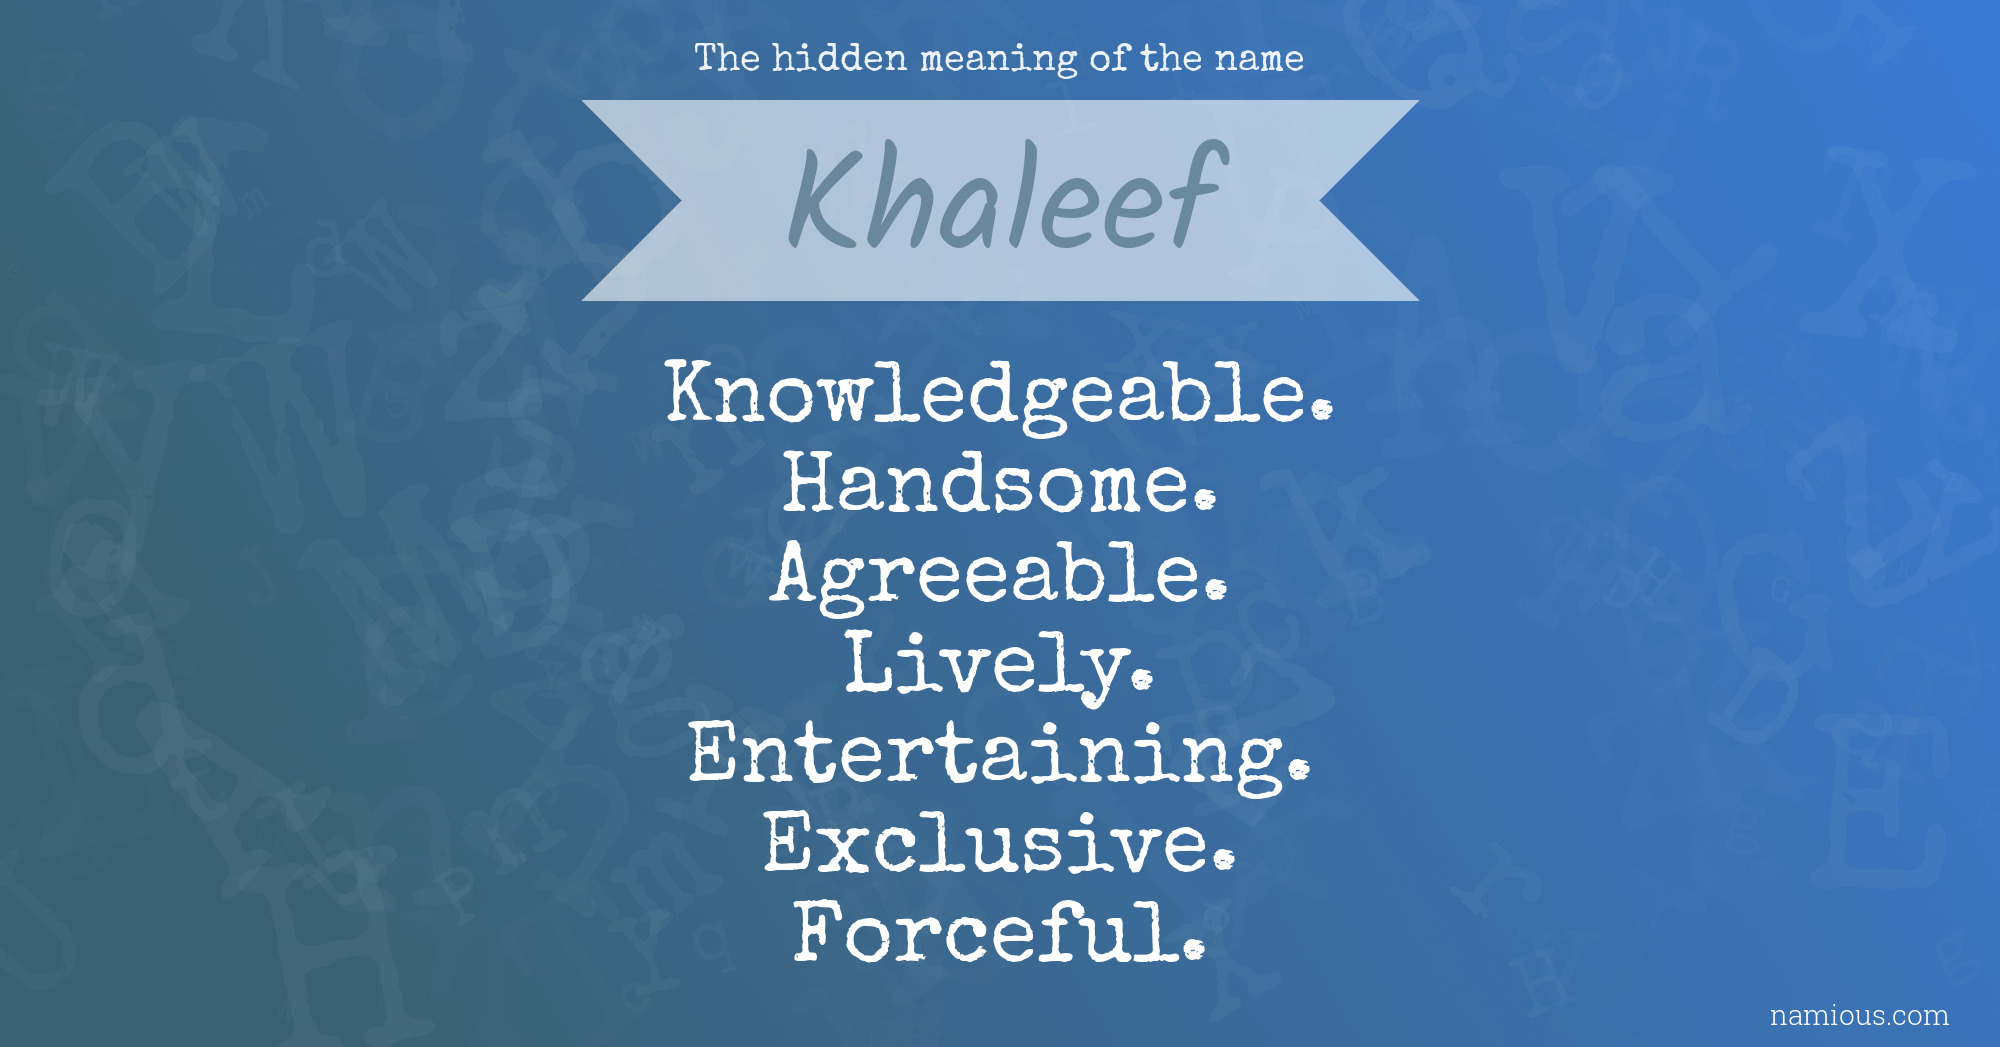 The hidden meaning of the name Khaleef